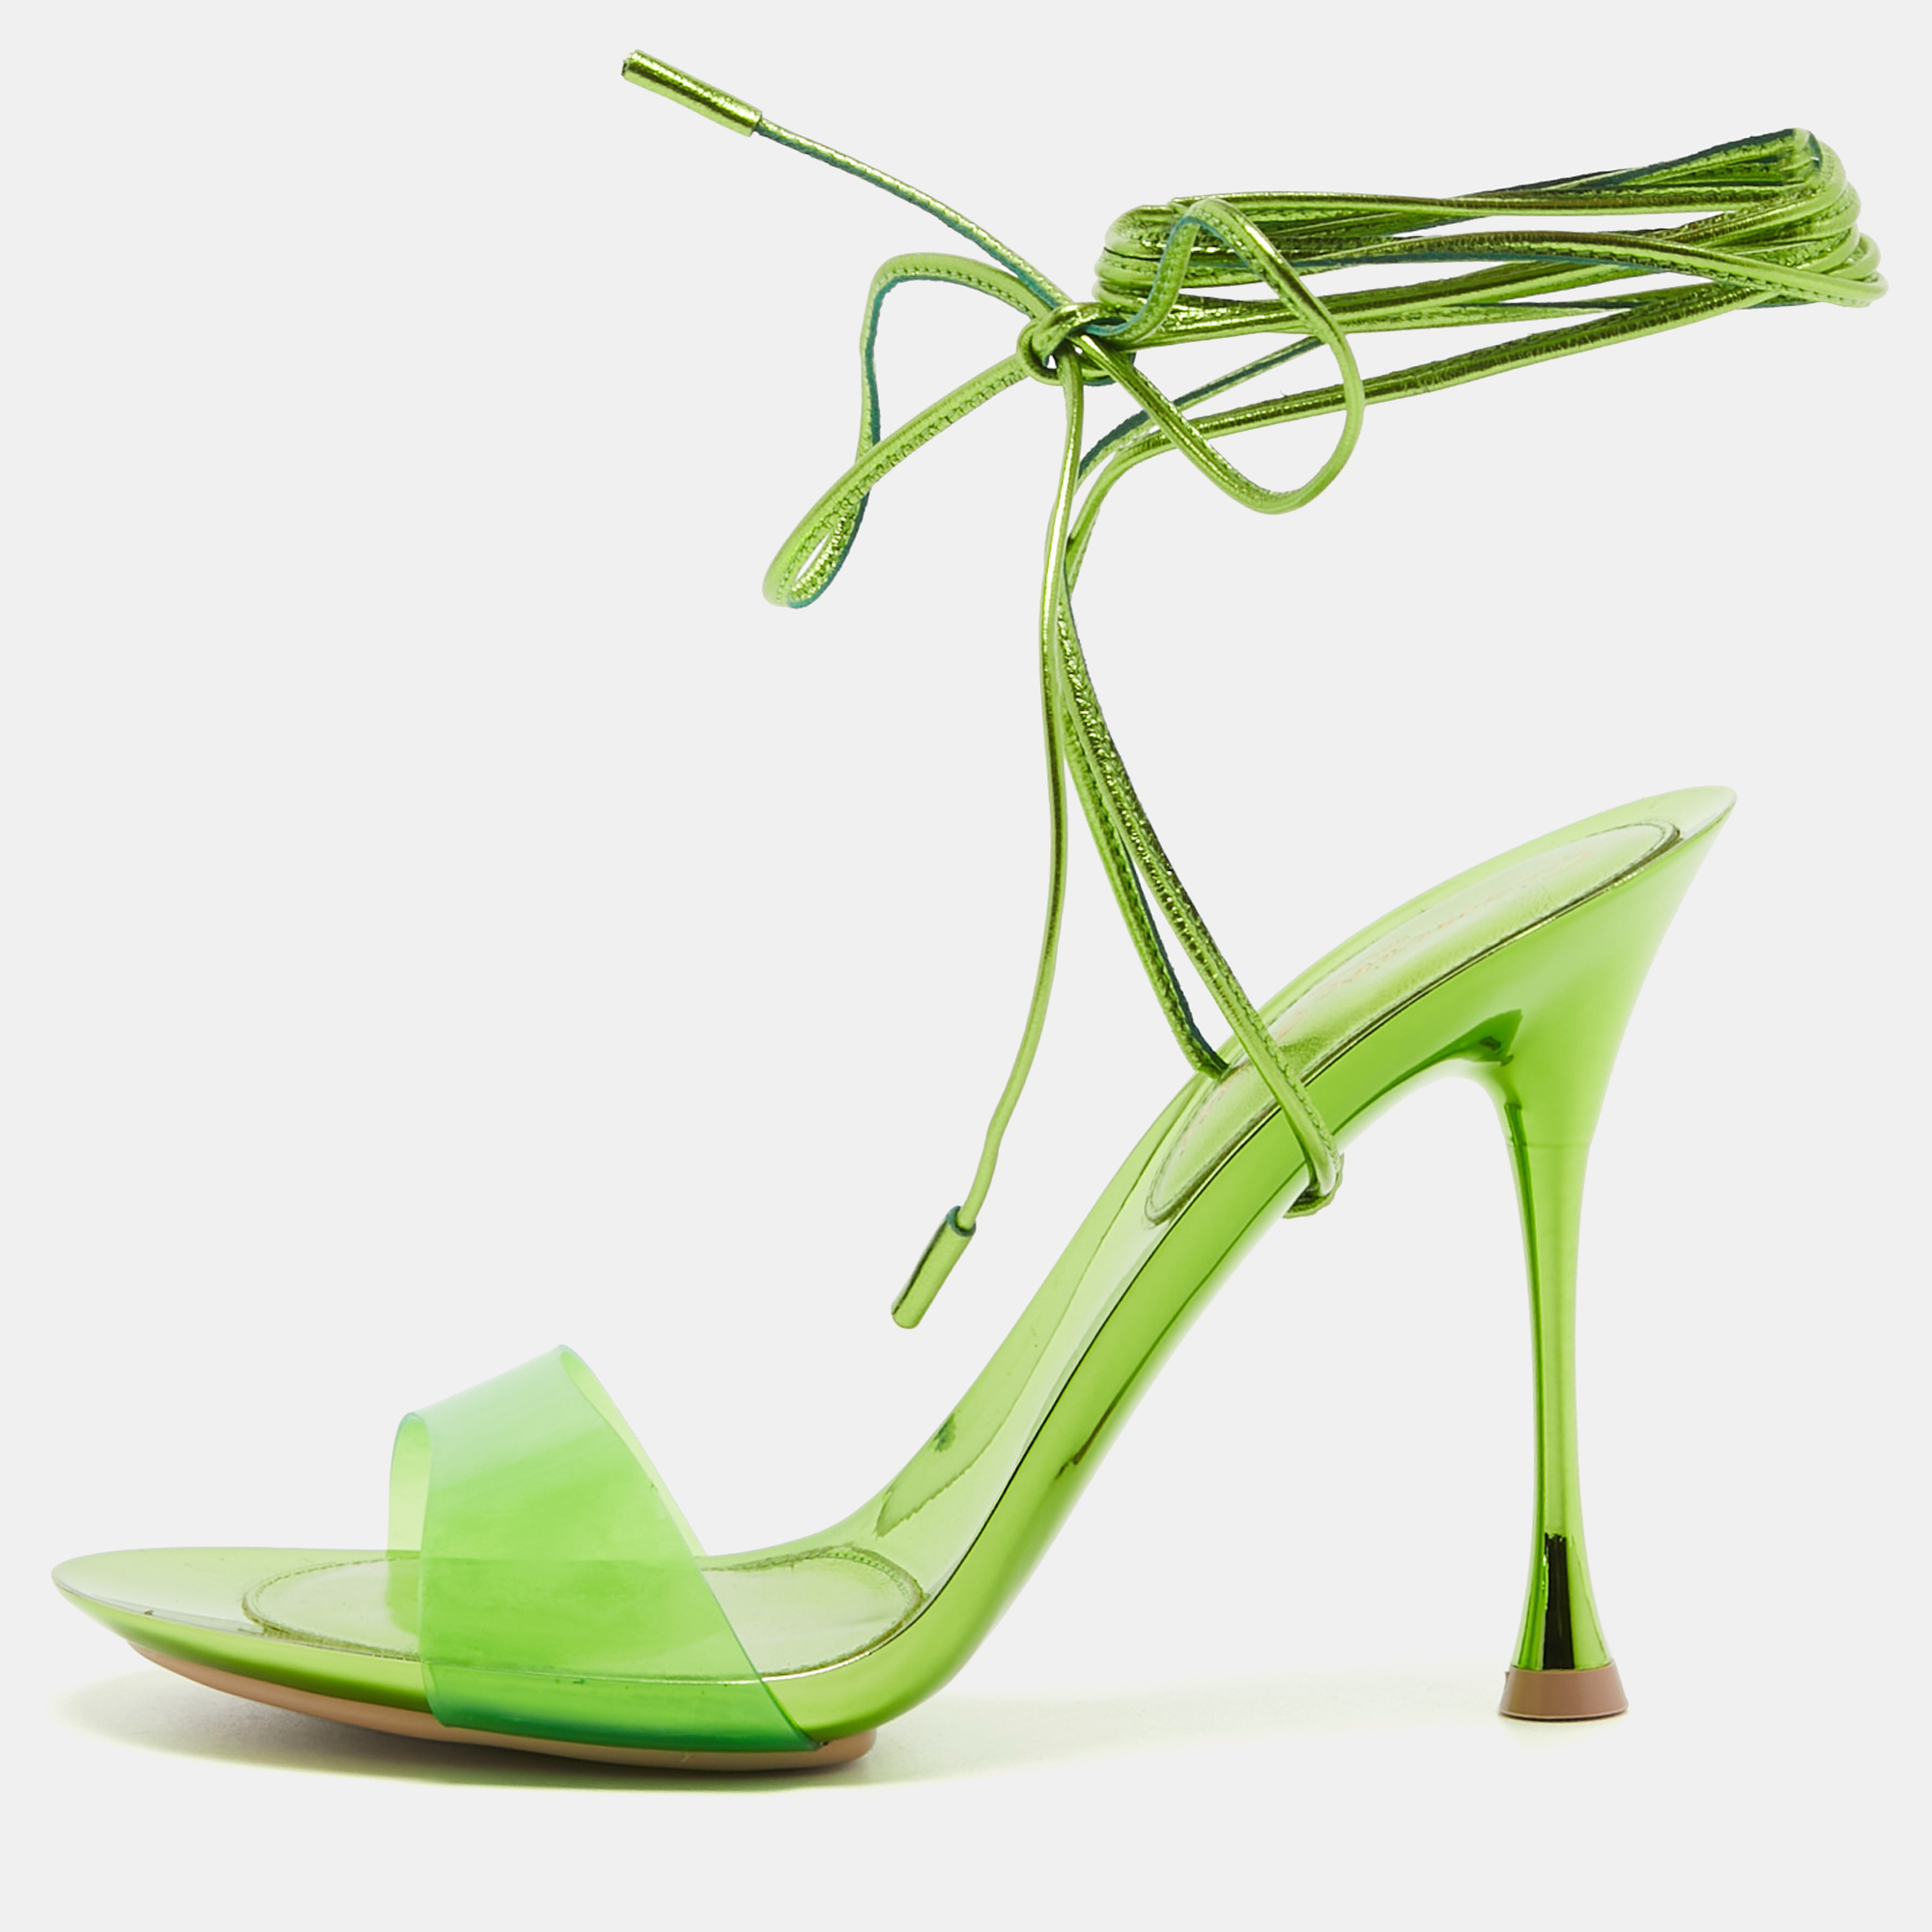 Pre-owned Gianvito Rossi Green Pvc And Leather Spice Ankle Tie Sandals Size 35.5